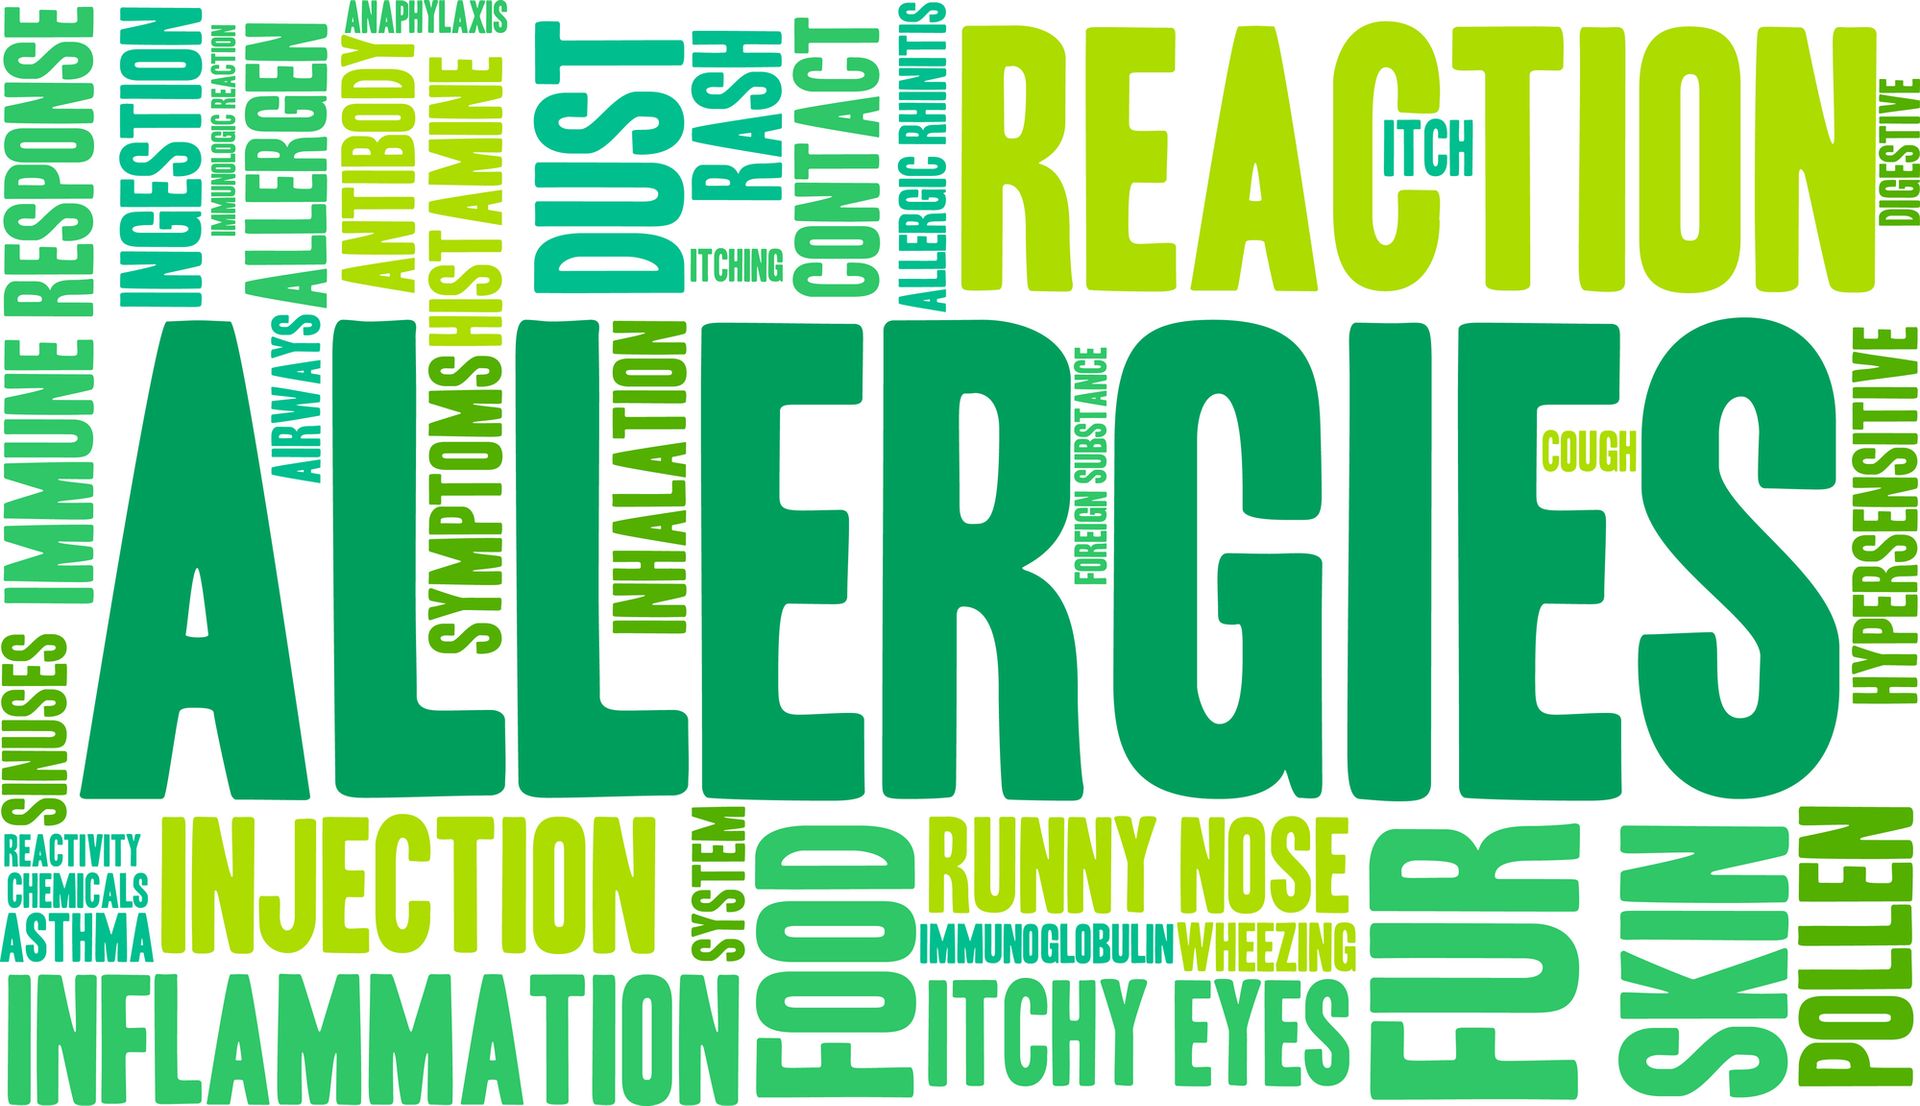 Reducing Allergens in Your Home for a Healthier Environment